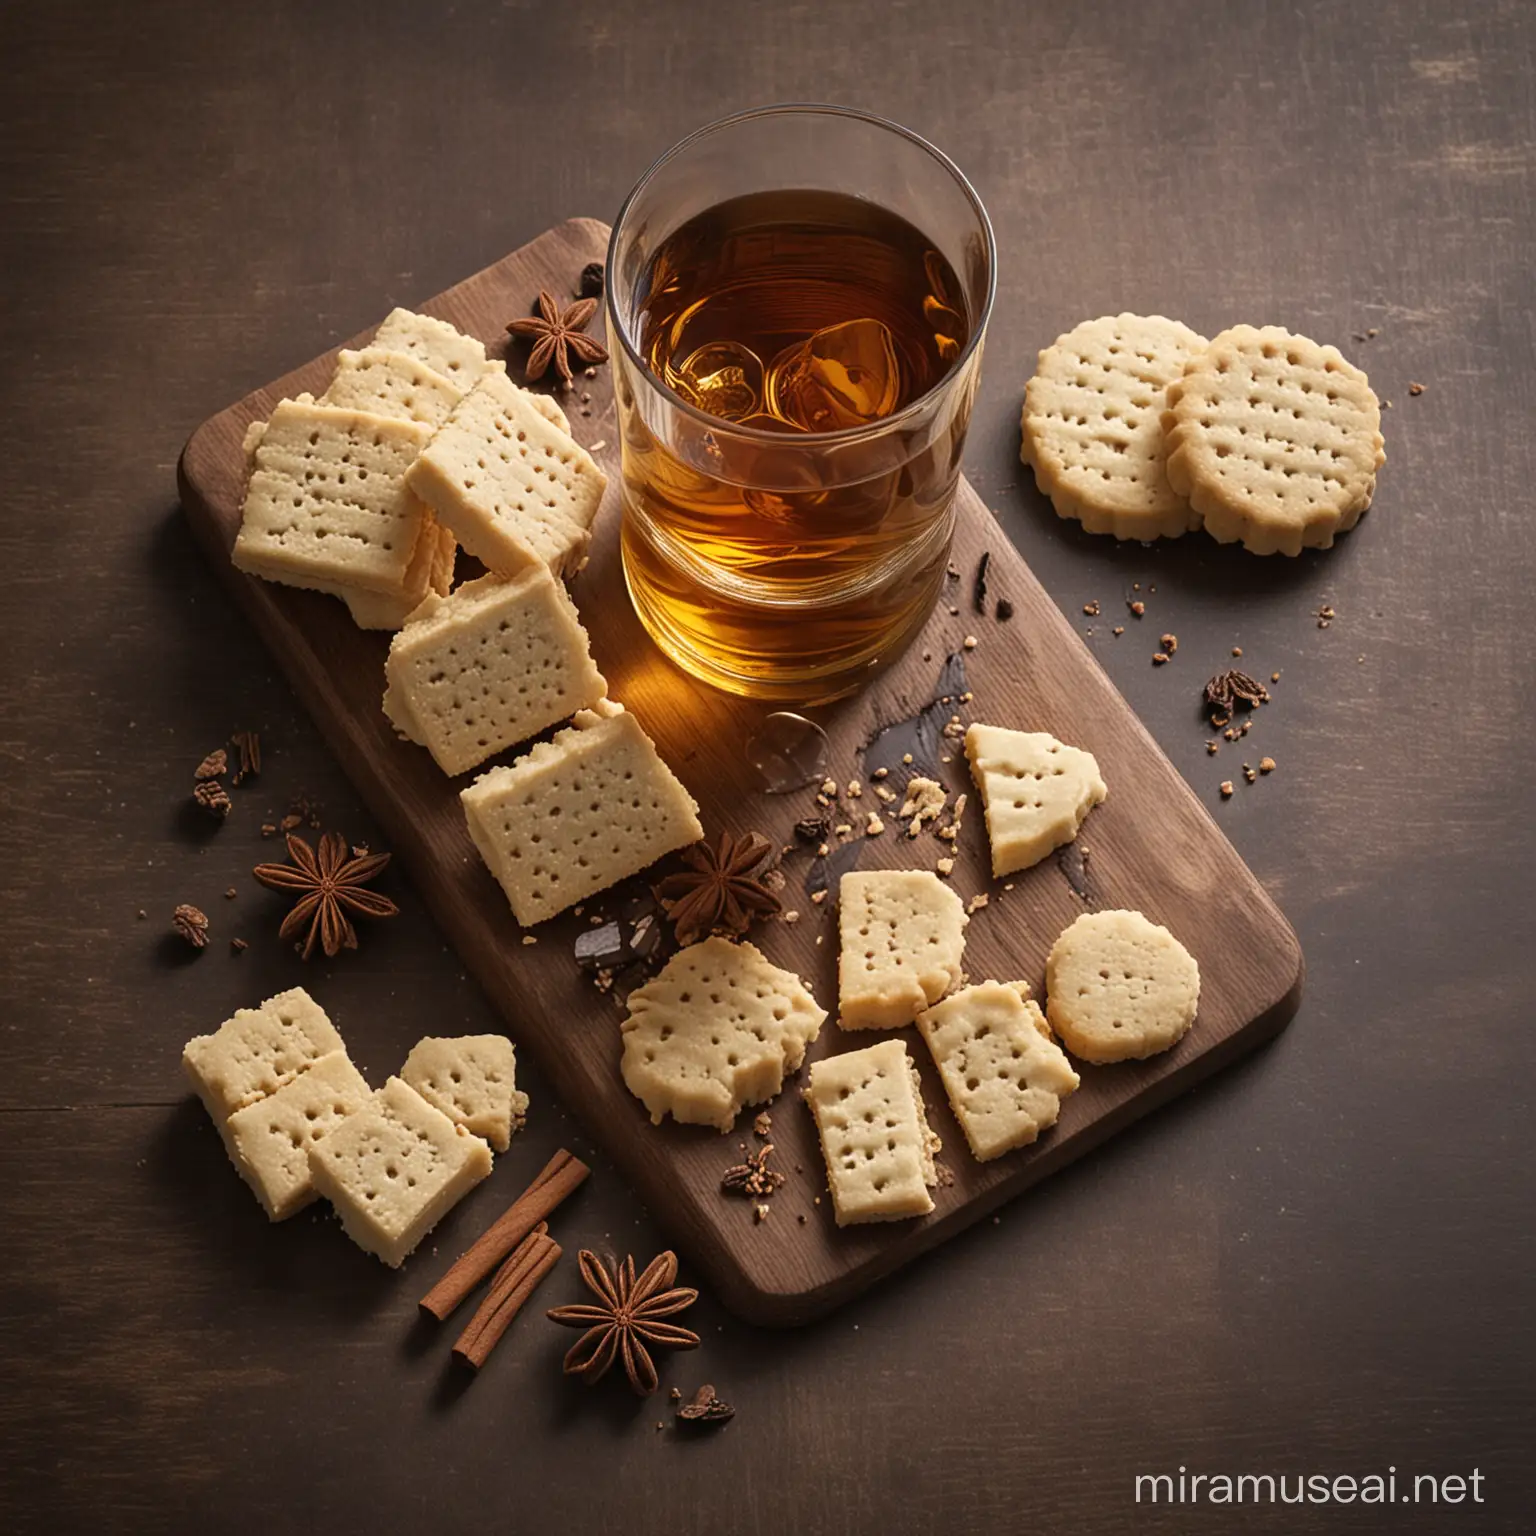 Scotch Whisky and Shortbread A Rustic Scottish Delight